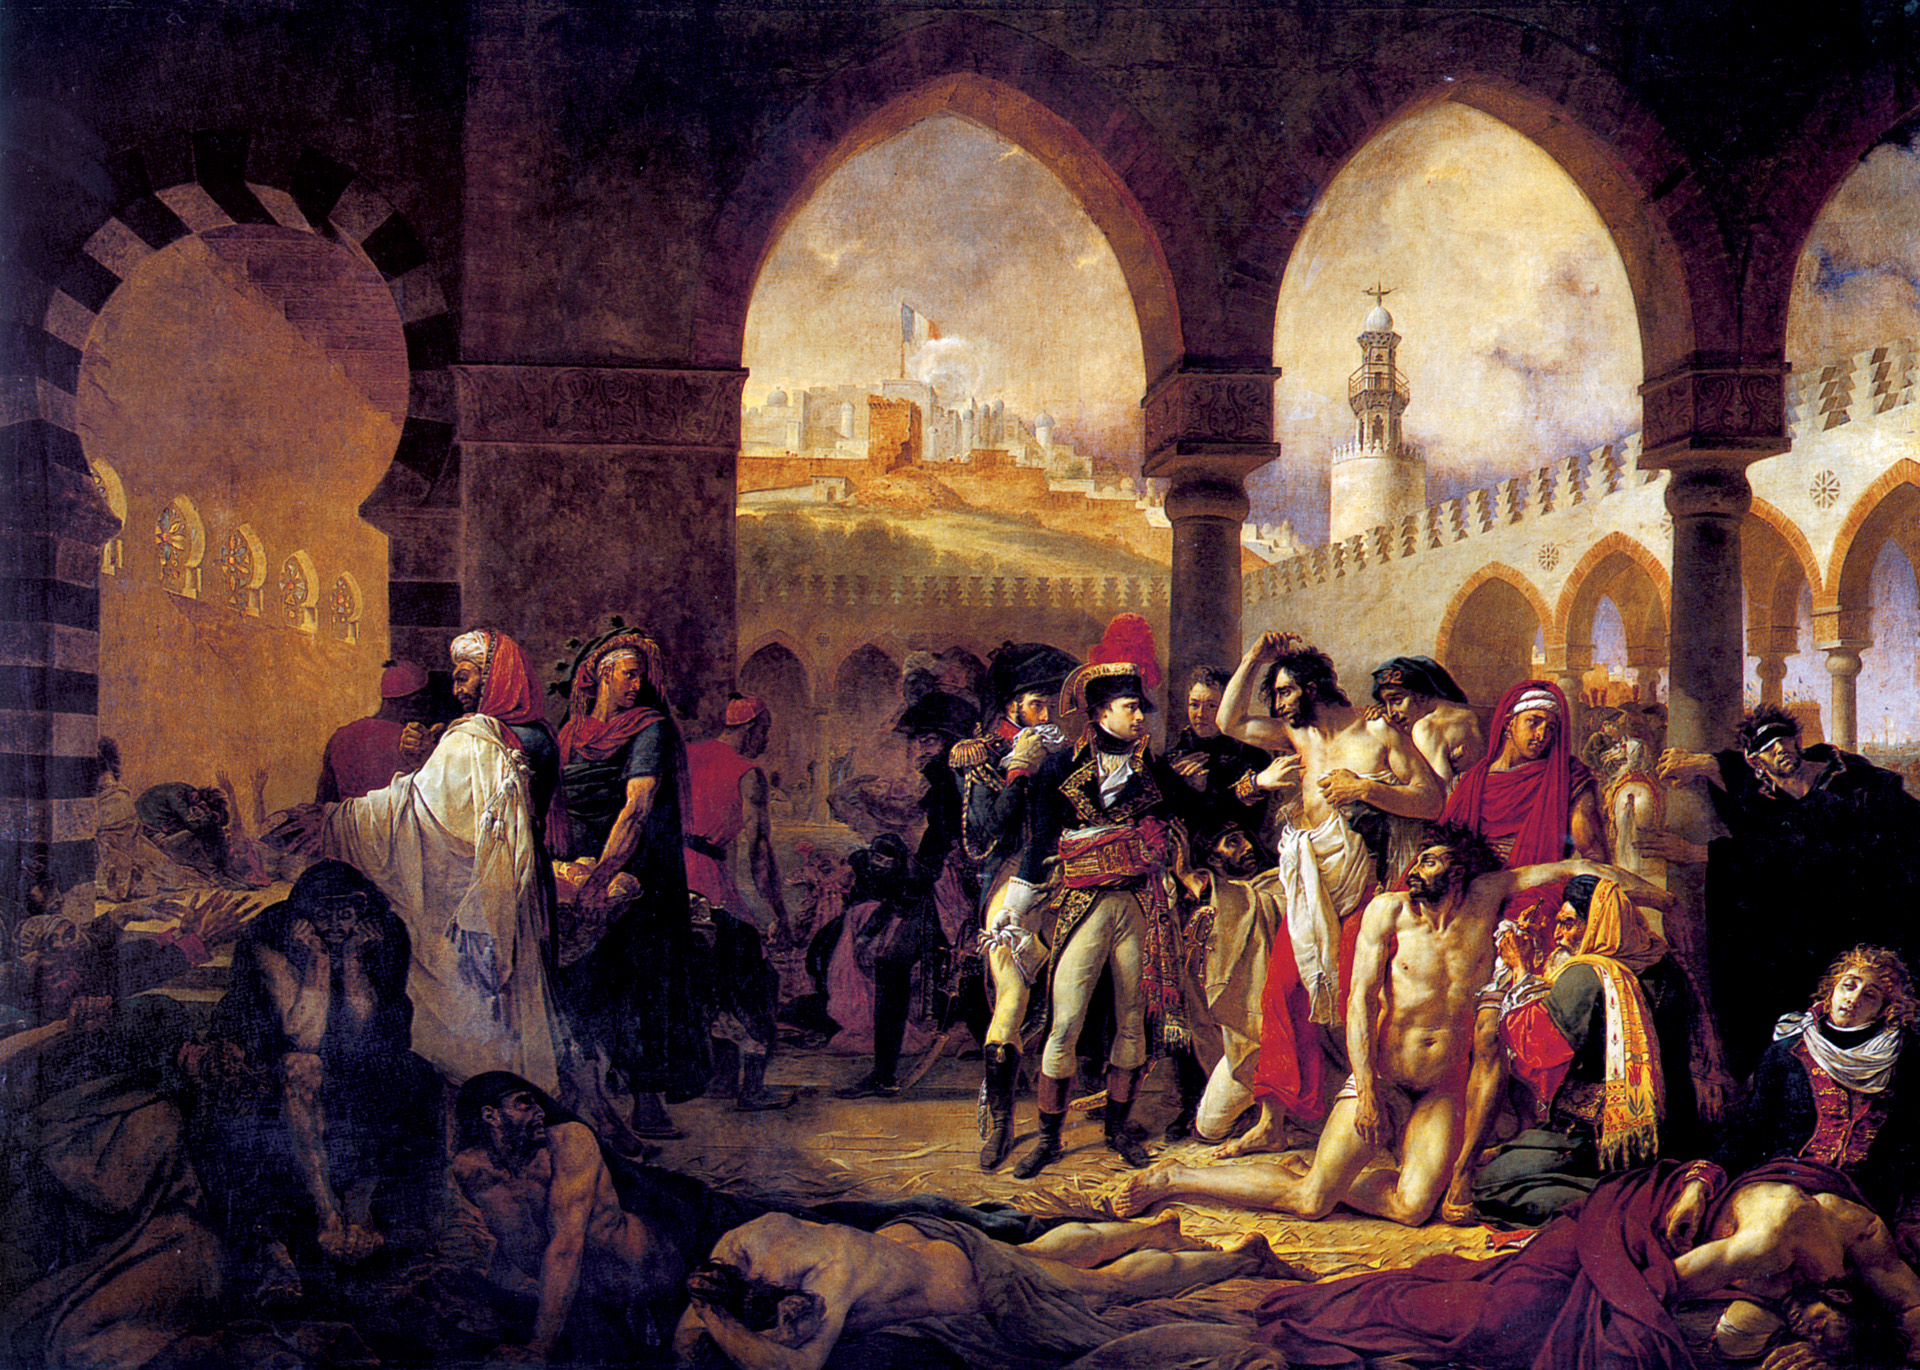 Five years after his visit to plague victims in Jaffa in 1799 during the Egypt-Syria campaign, Bonaparte commissioned a painting of the event by neoclassical painter Antoine-Jean Gros.